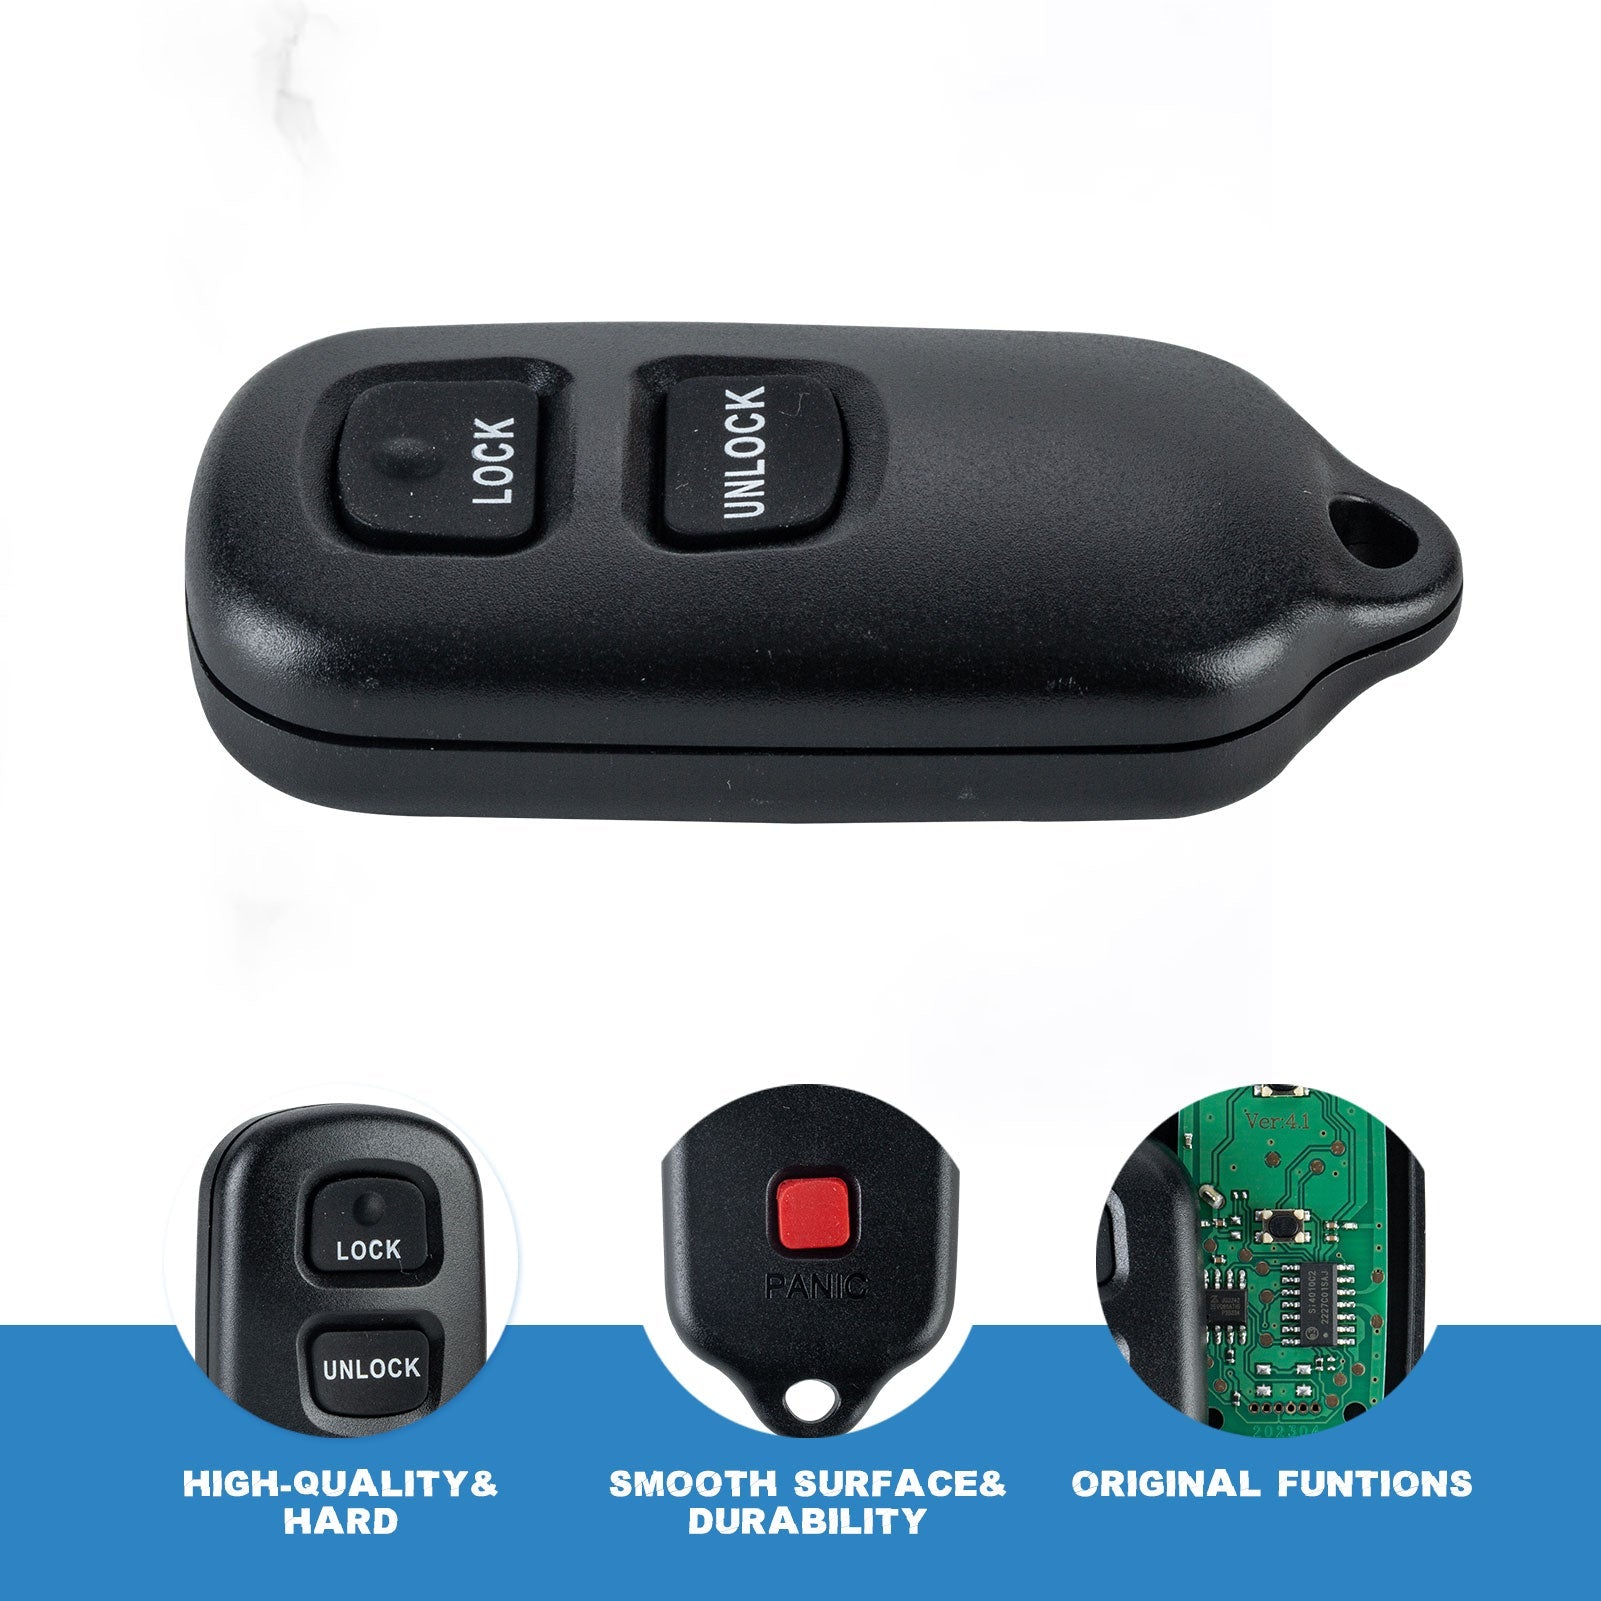 315MHZ Car Key Fob Replacement for 2004-2006 Toyota Tundra Remote HYQ12BAN, HYQ12BBX, HYQ1512Y  KR-T3RD-05